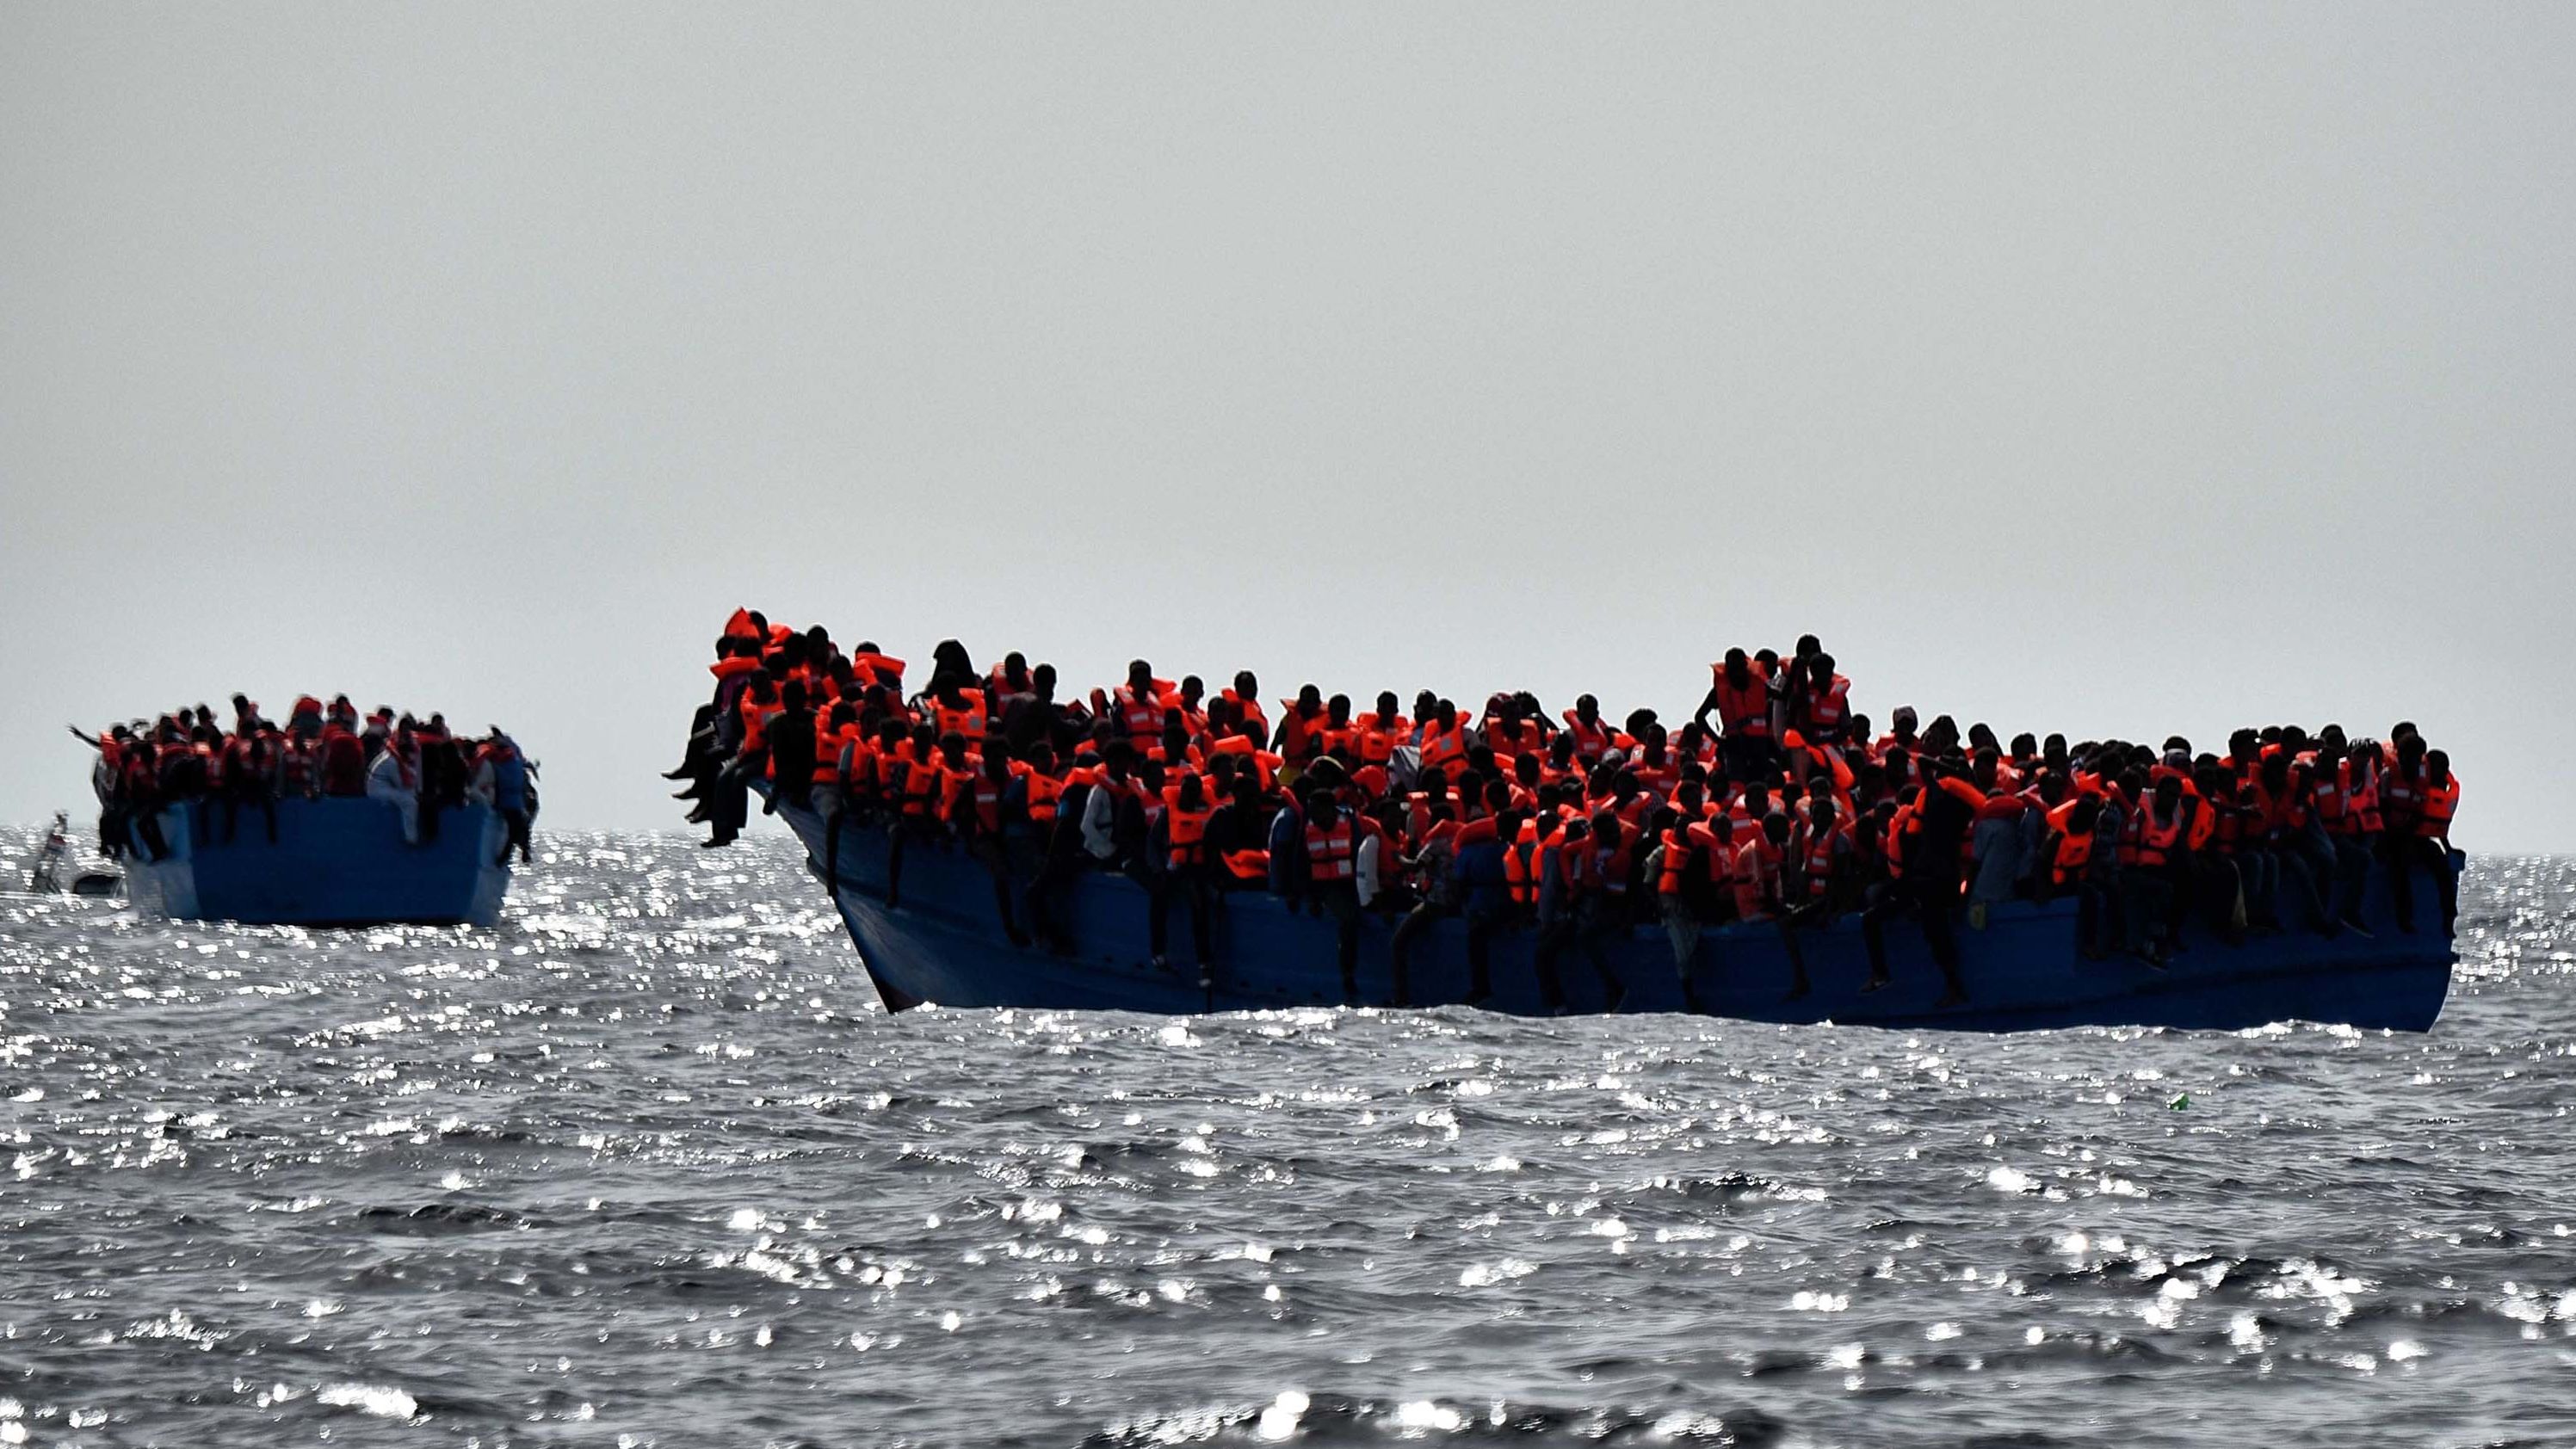 A file photo shows migrants waiting to be rescued as they drift in the Mediterranean Sea off the coast of Libya on October 3, 2016.